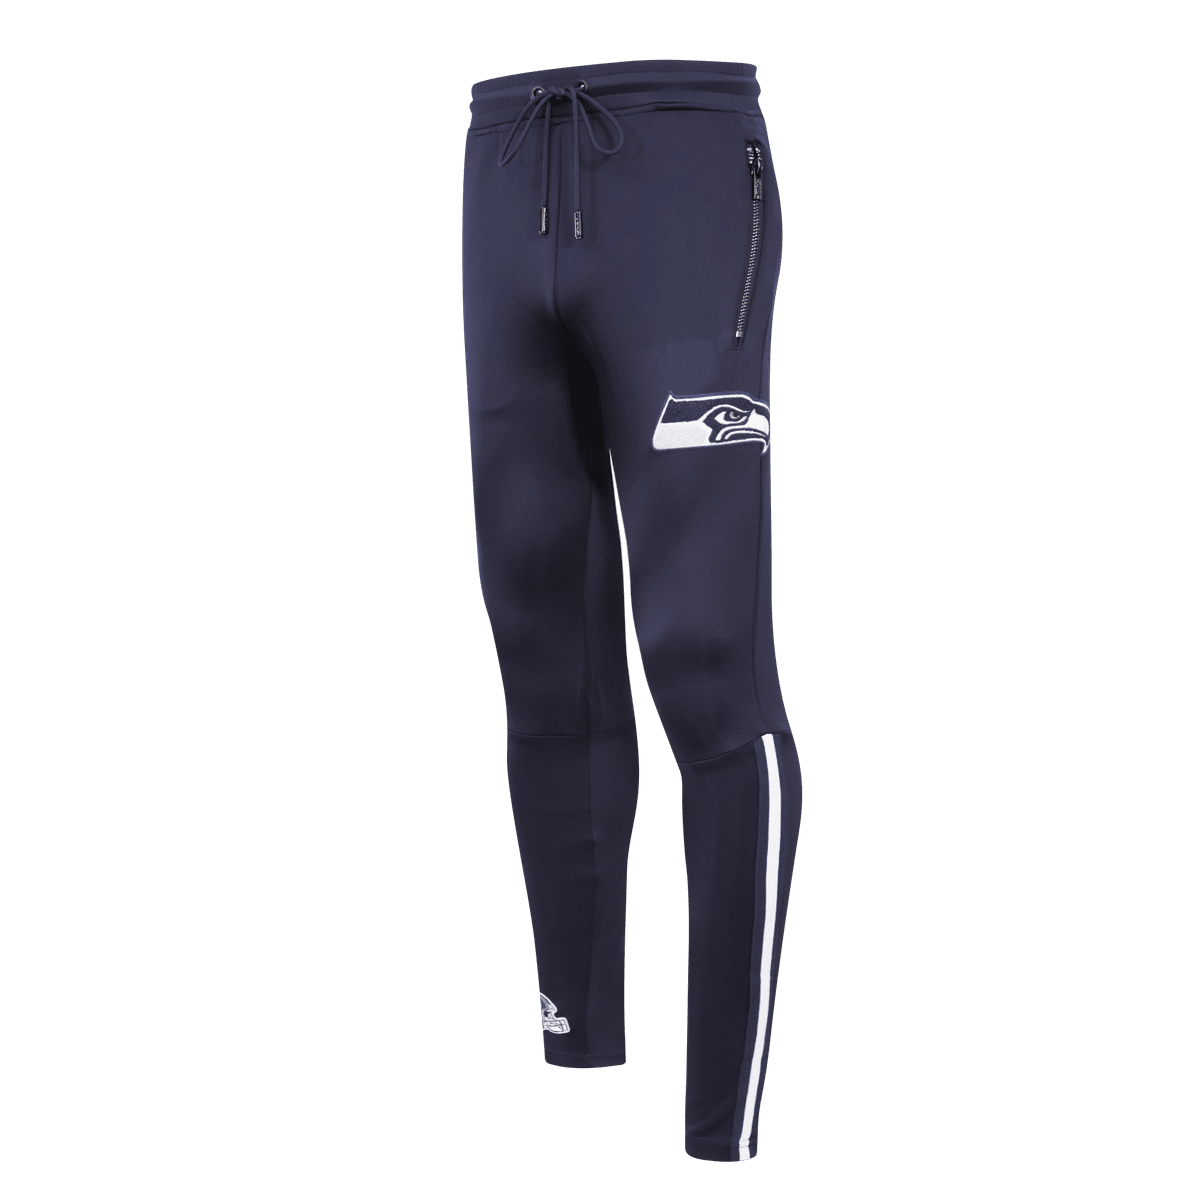 NFL SEATTLE SEAHAWKS CLASSIC MEN'S TRACK PANT (MIDNIGHT NAVY)